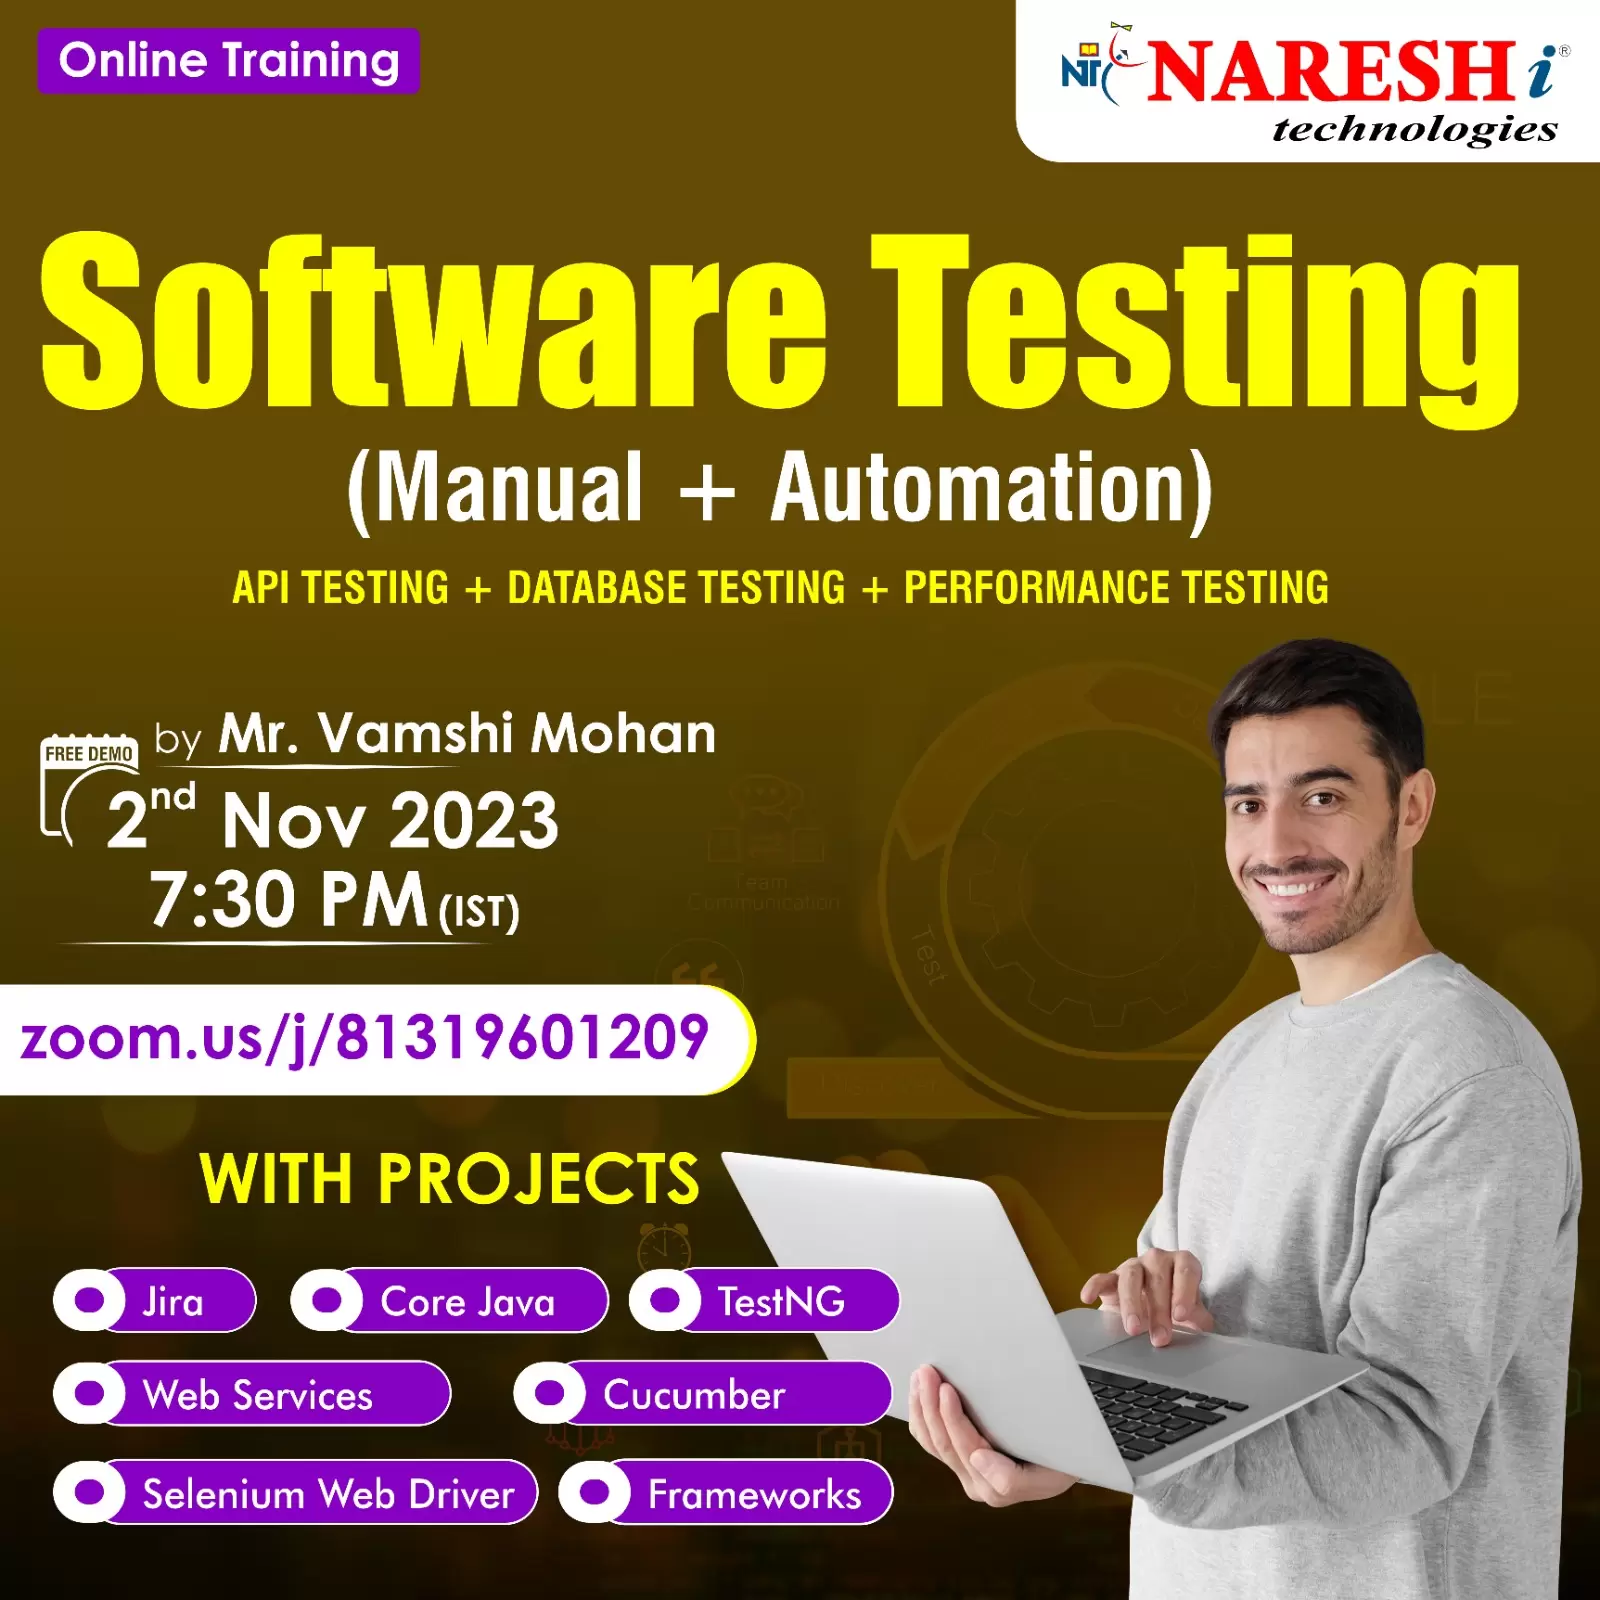 Best Online Course Software Testing Training in NareshIT